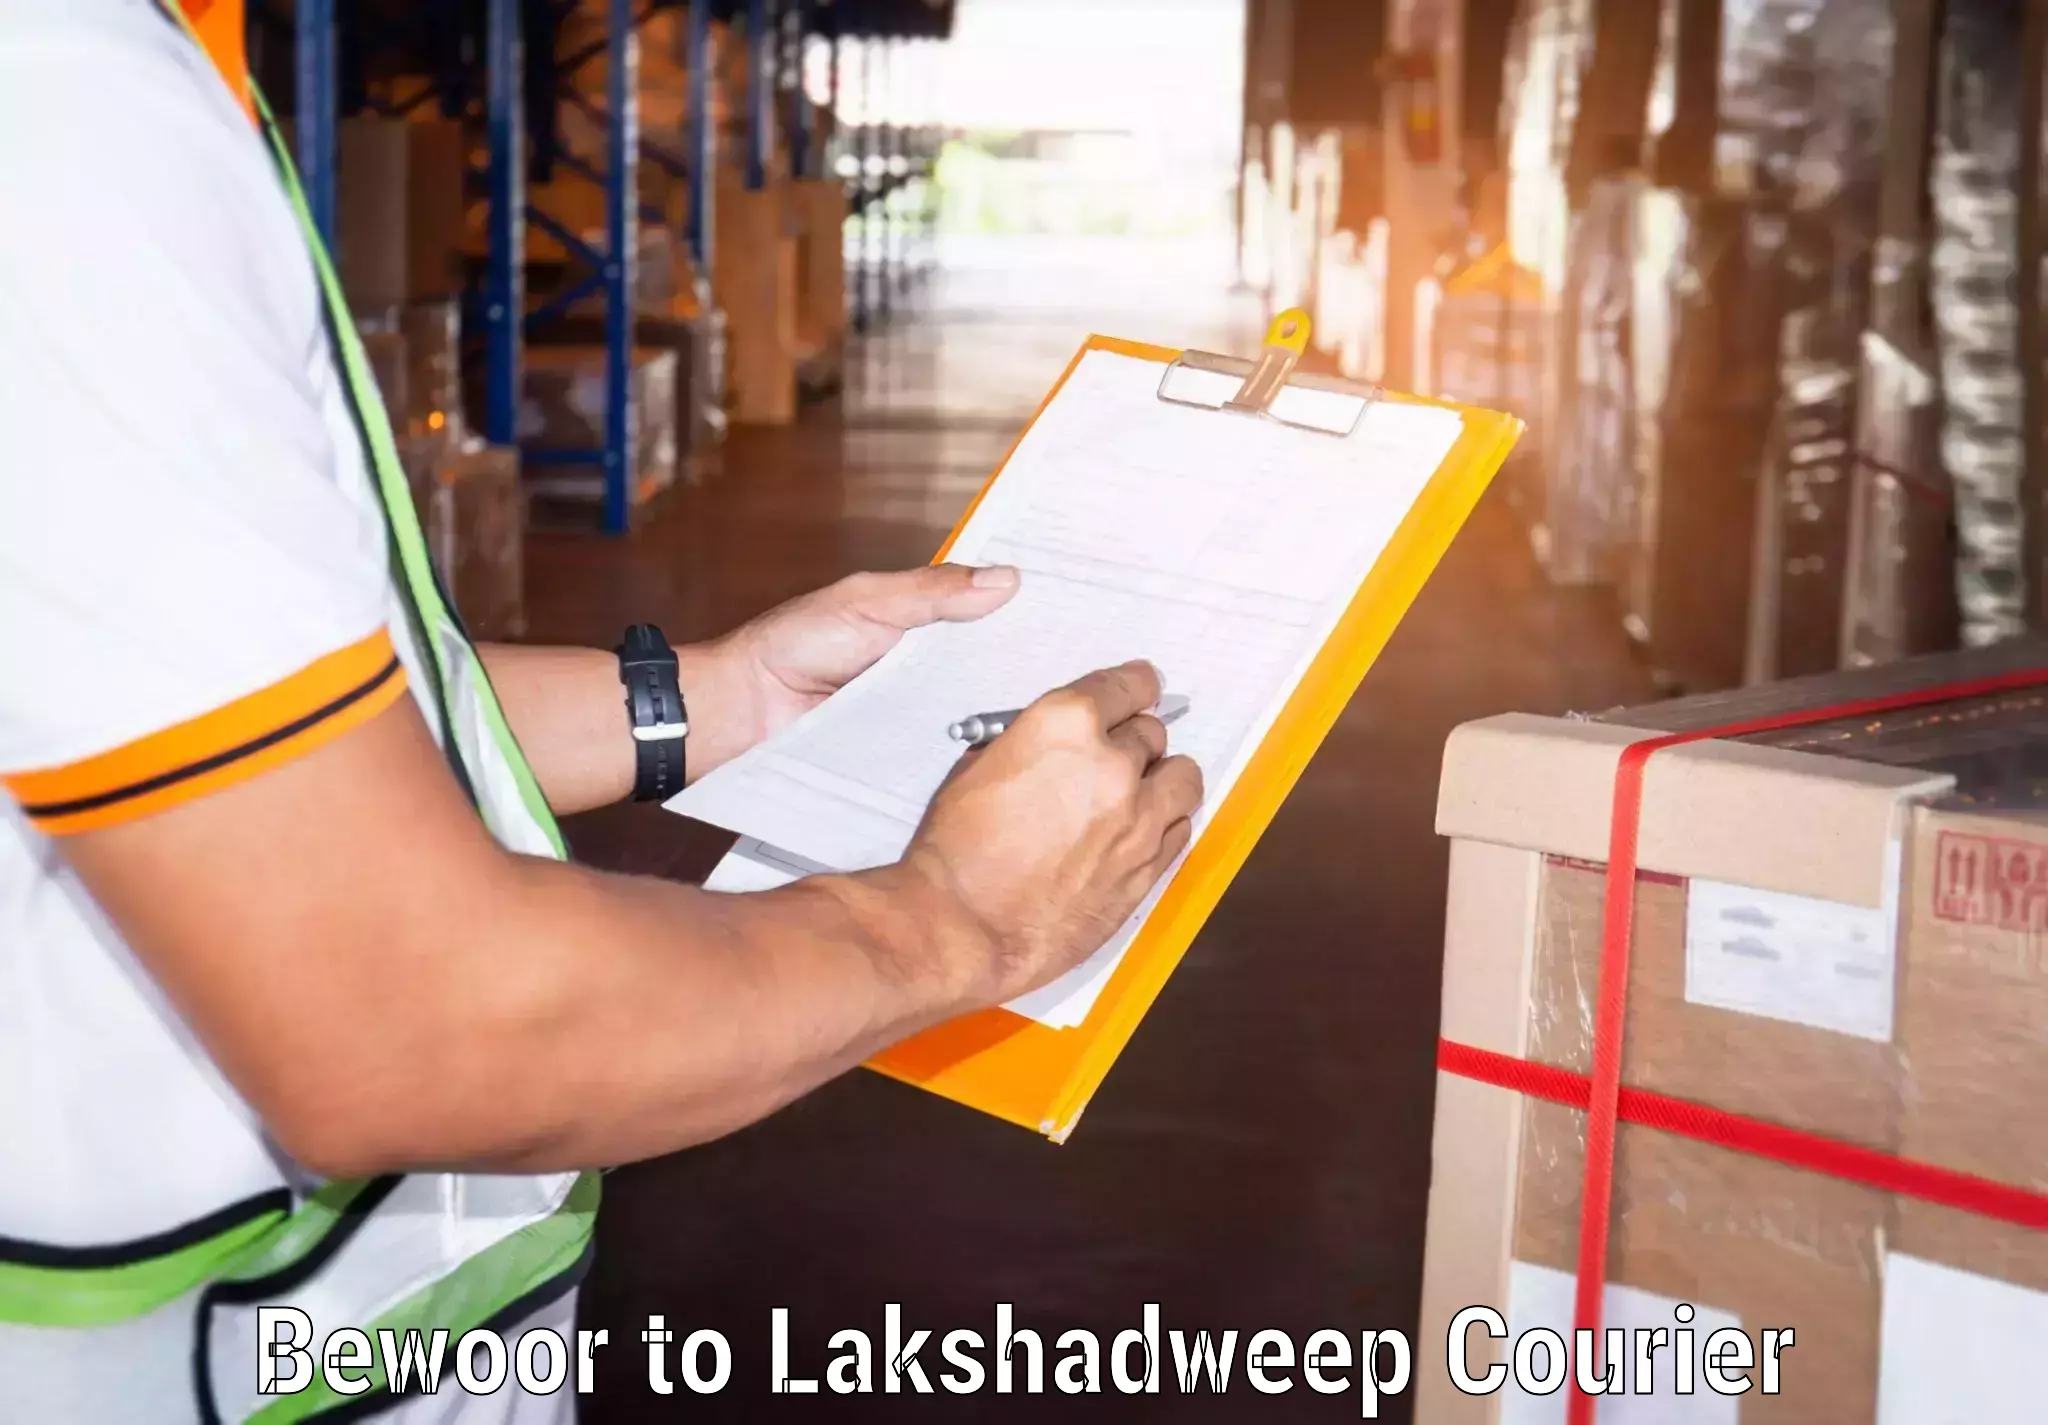 Courier service partnerships Bewoor to Lakshadweep